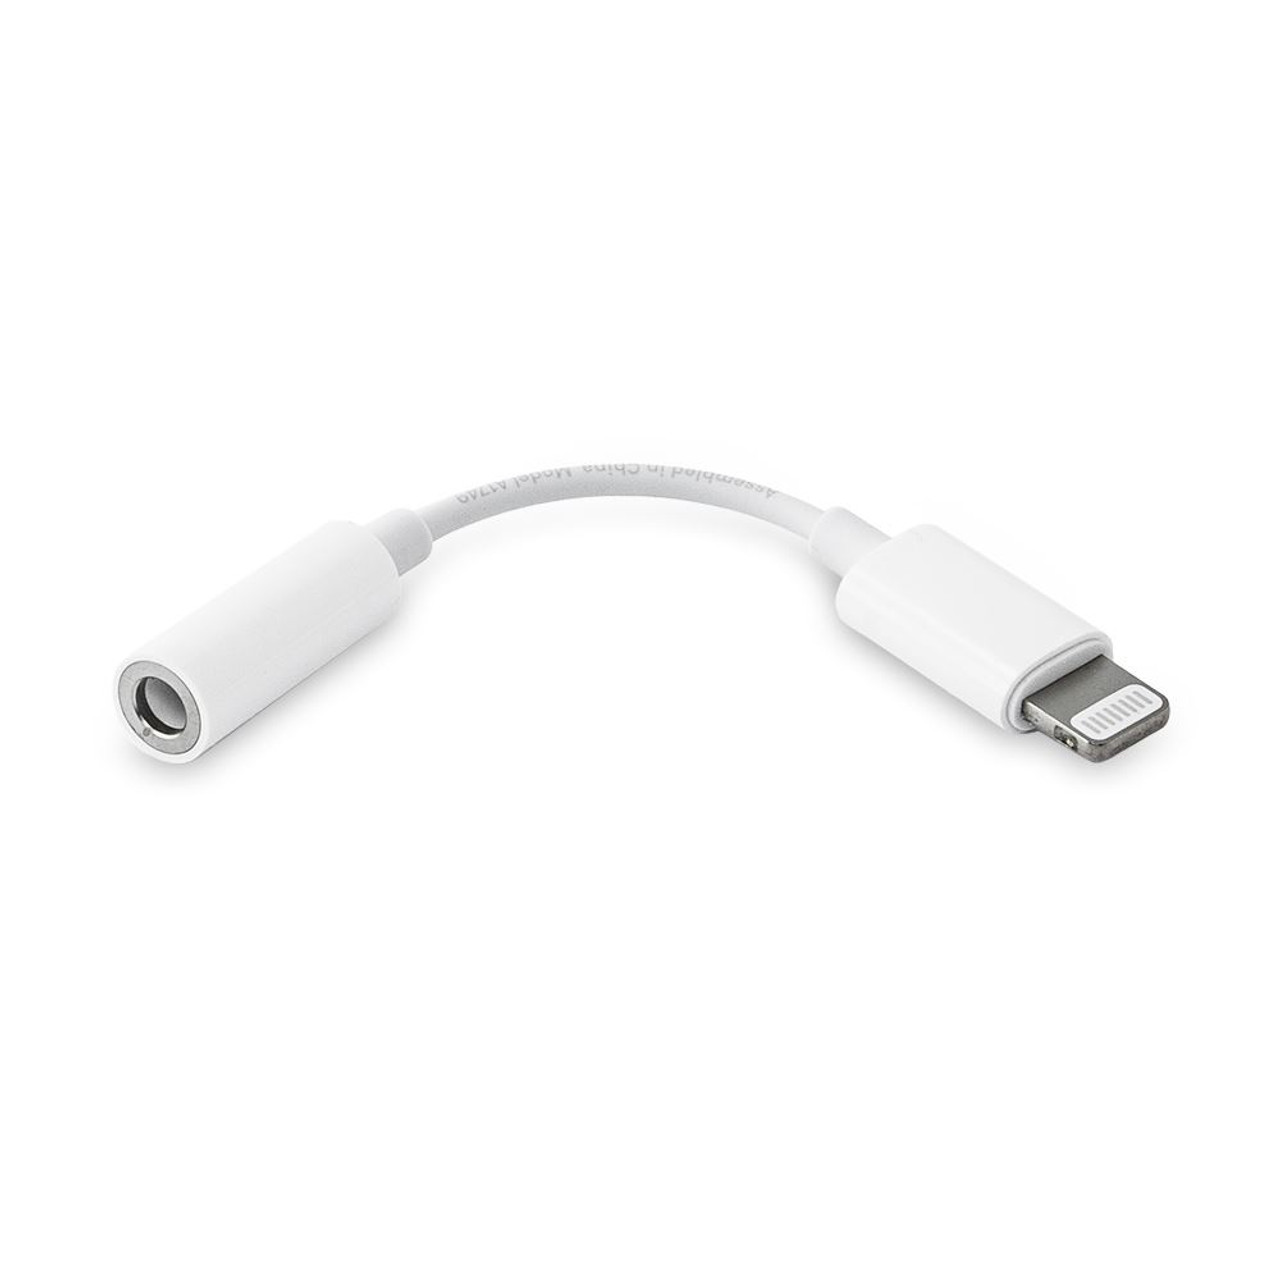 Genuine Original Official Apple Lightning Connector to 3.5mm Headphone Jack  Adapter for iPhone X / 8 / 8 Plus / 7 / 7 Plus / 6s / 6s Plus / 6 / 6 Plus  / SE / 5s / 5 / iPad Pro / iPad Air 2 - MMX62ZM/A (Bulk Packed)